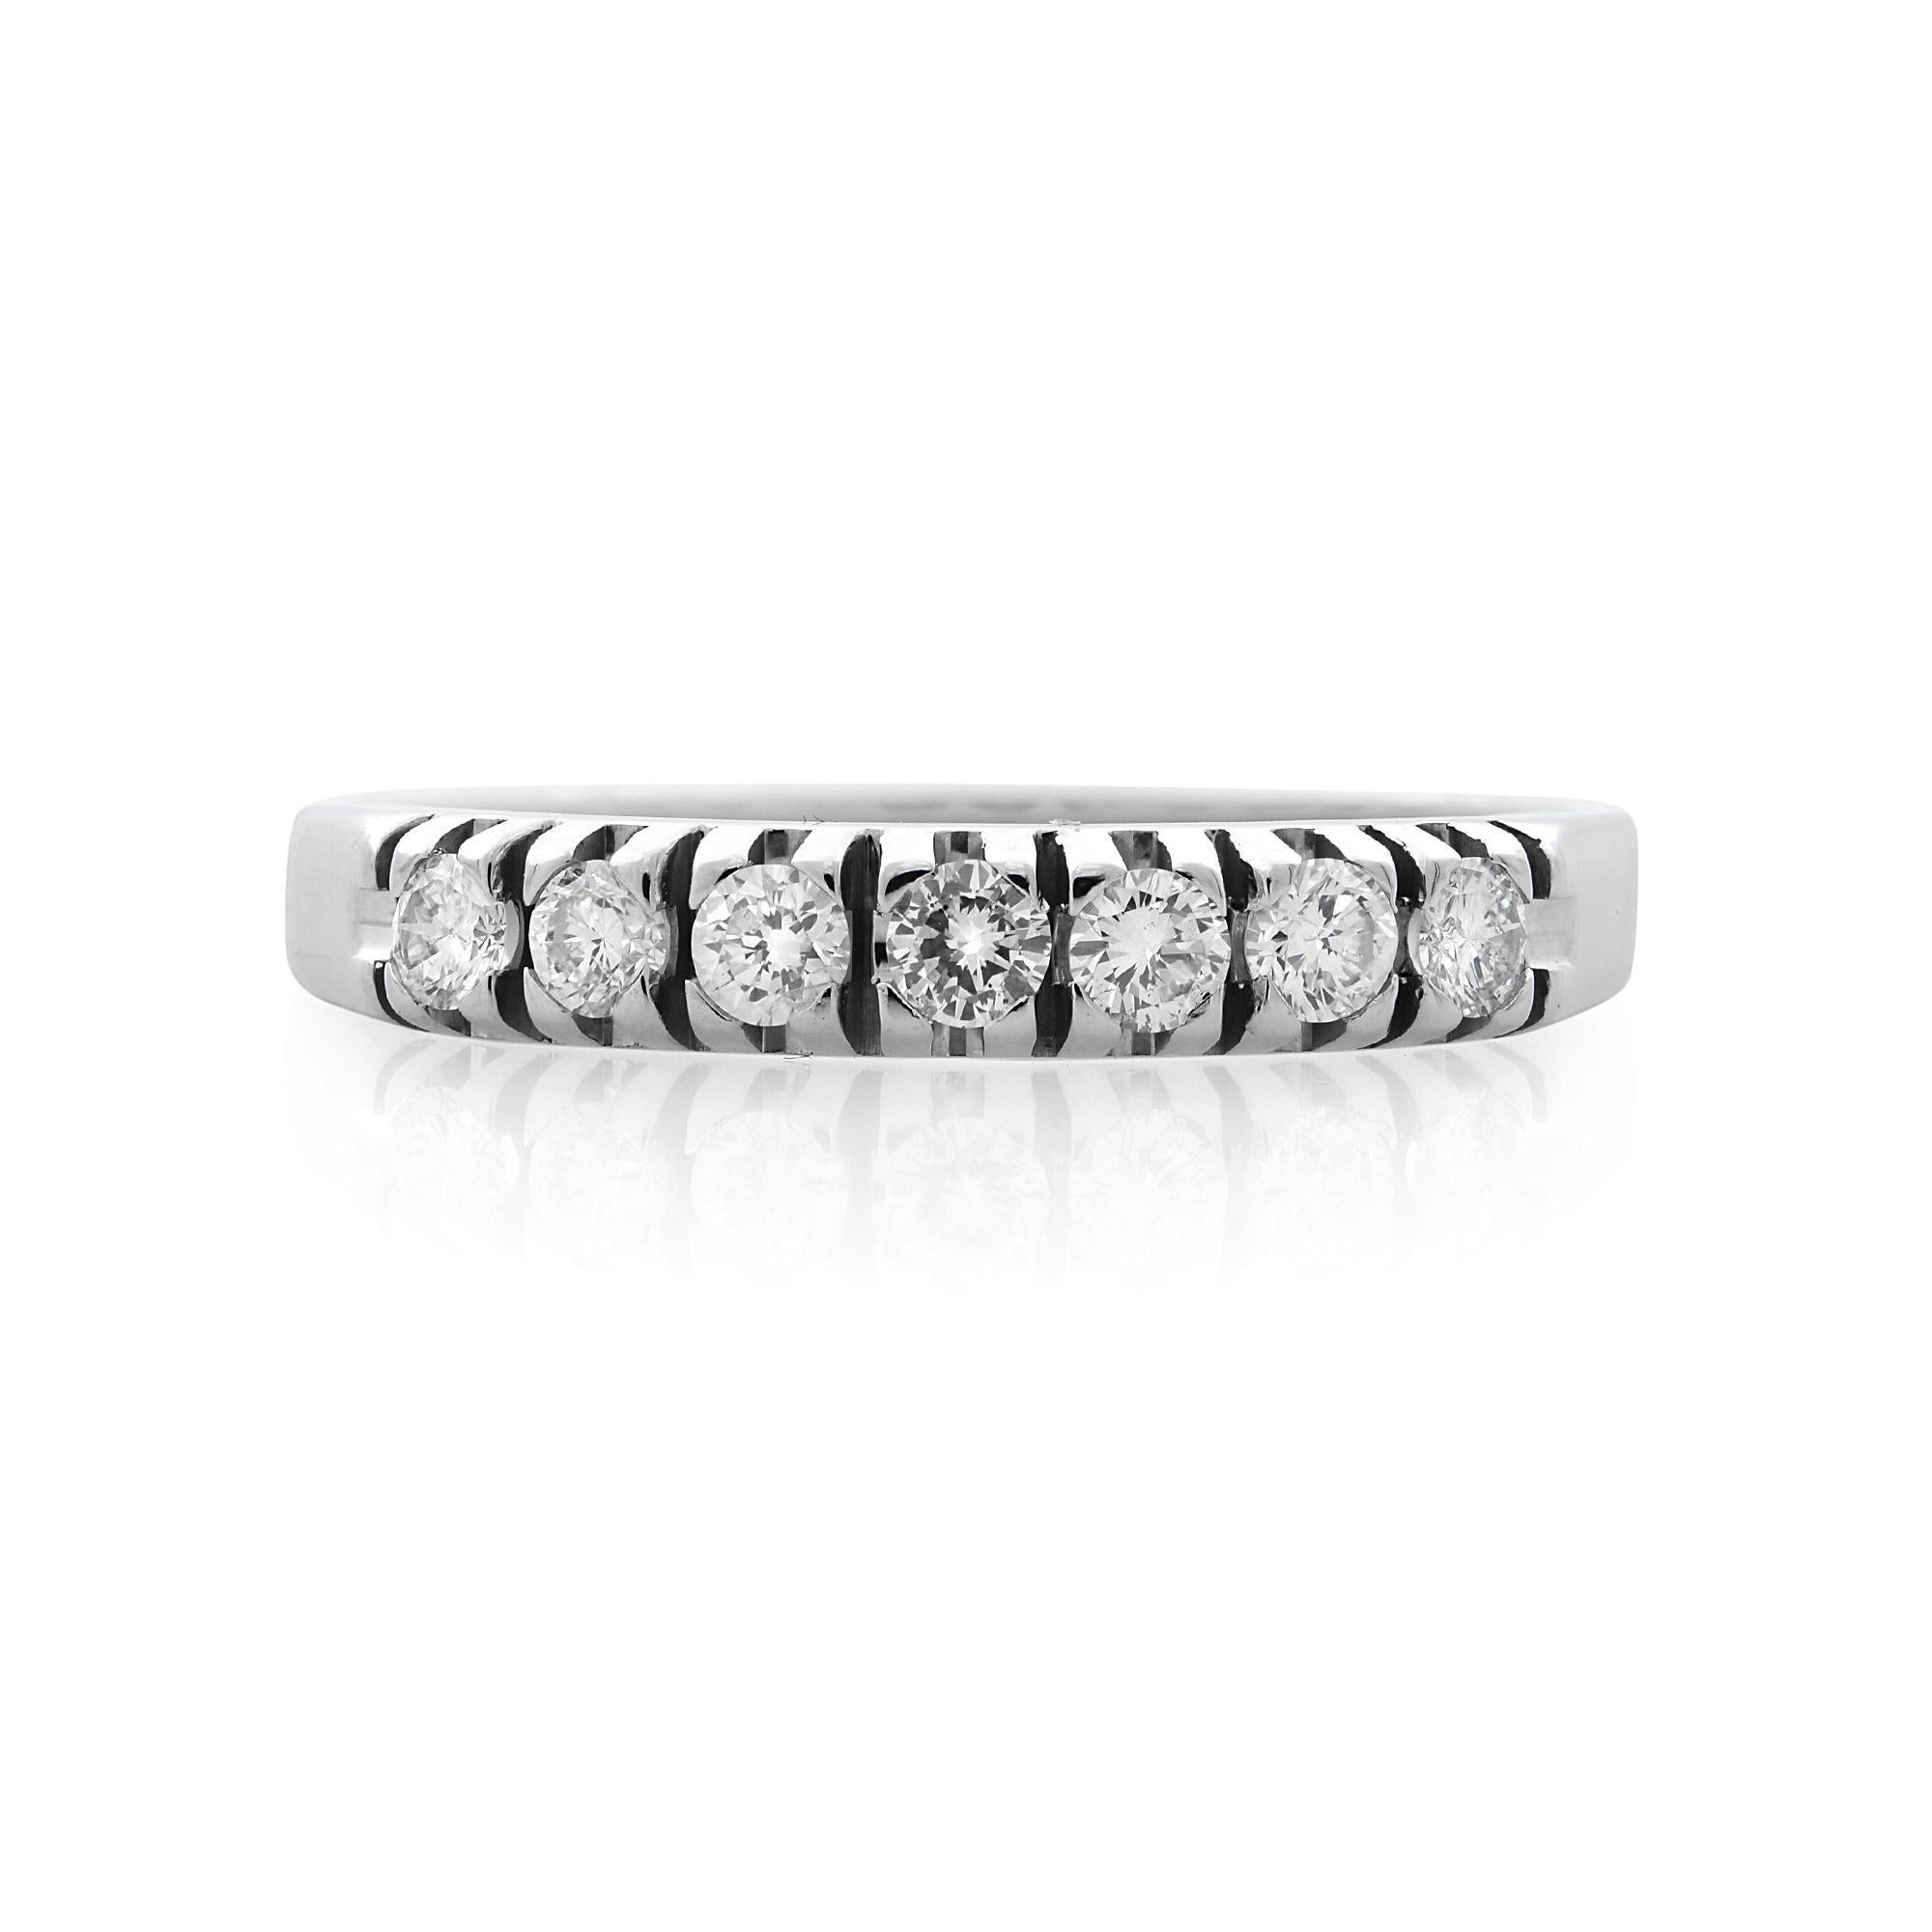 Delicately crafted, small pave diamond wedding band. Features 7 diamonds along the top of the ring to create a fine line of brilliance. Crafted in 14k white gold. Total carat weight of the diamonds 0.21 cttw. The ring width 3.00 mm., size: 7.5.